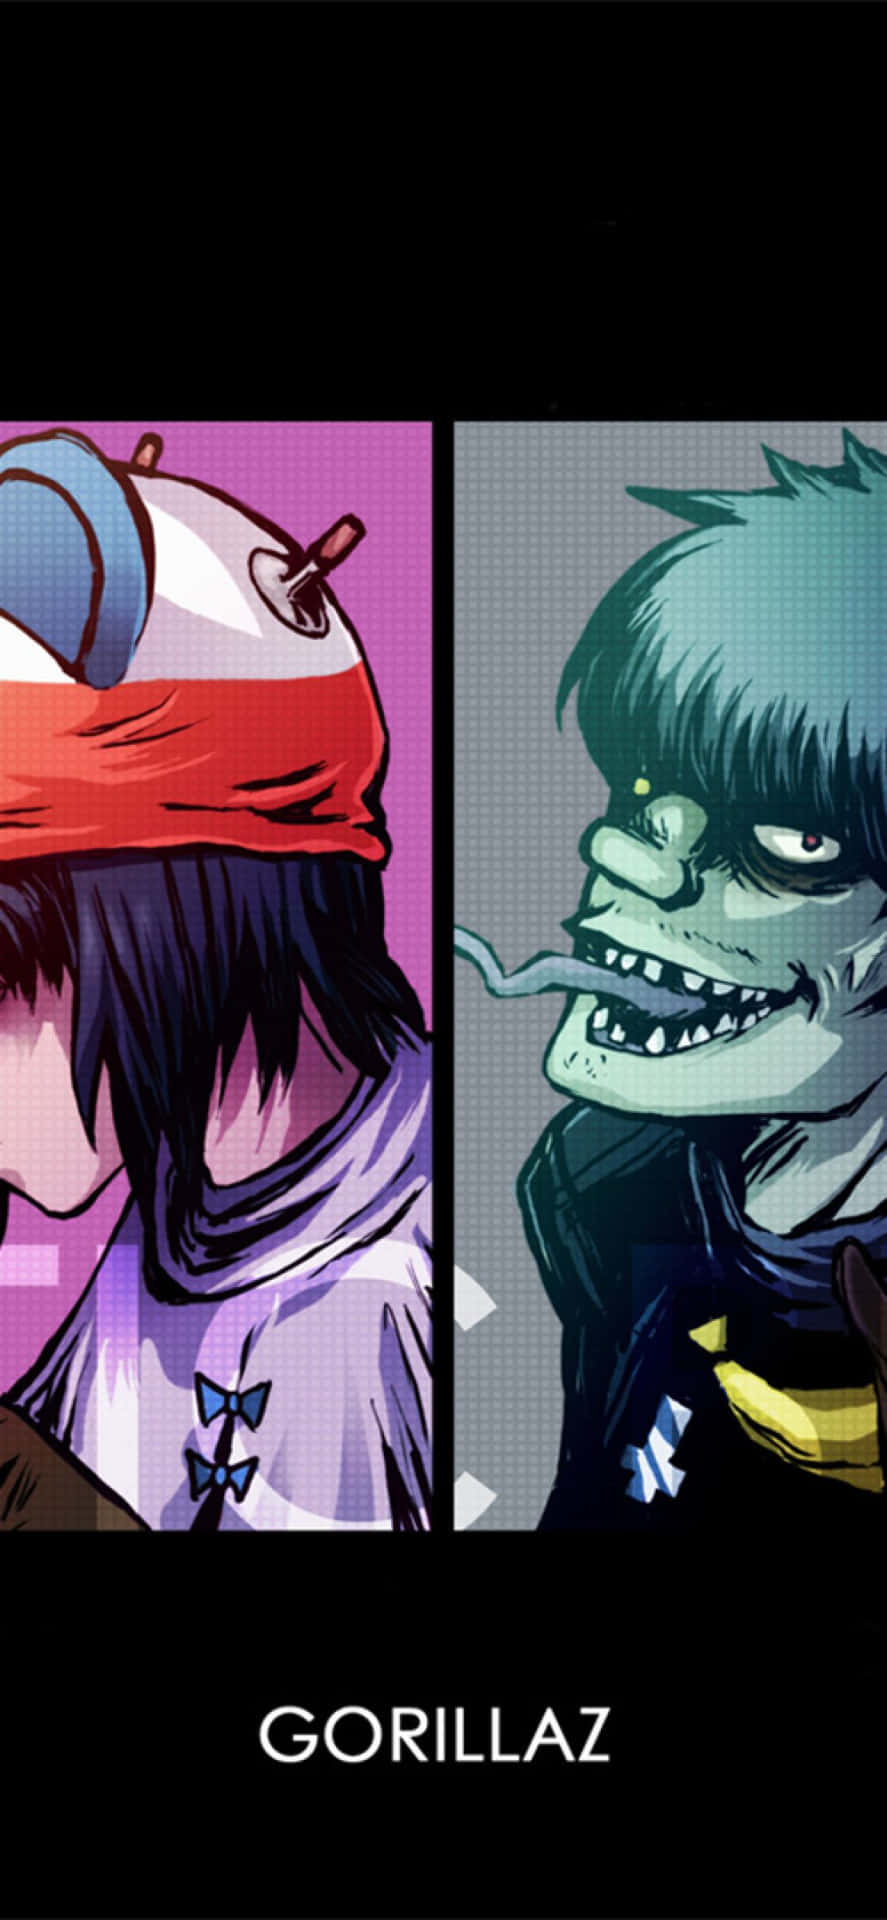 Gorillaz Iphone Cropped Murdoc And Noodle